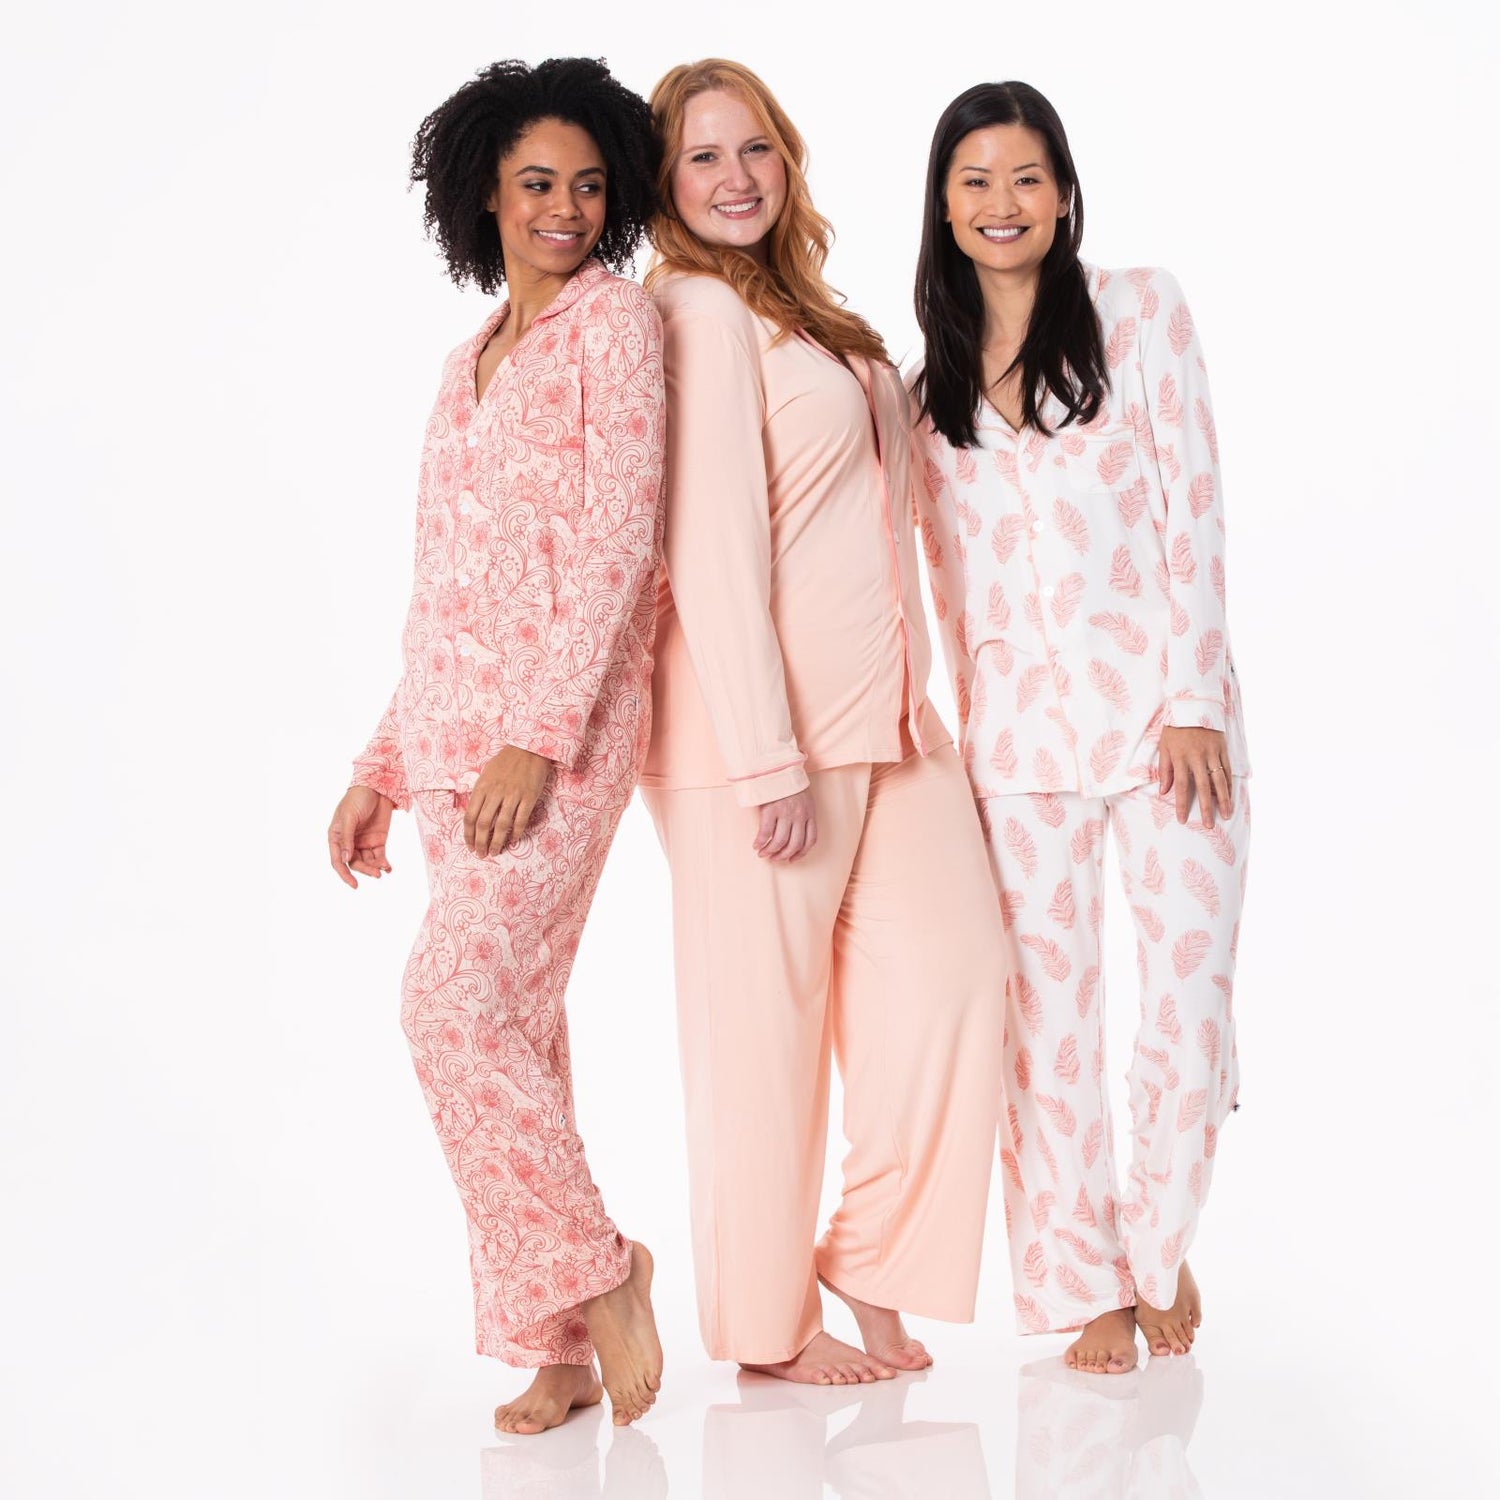 Women's Print Long Sleeve Collared Pajama Set in Natural Feathers